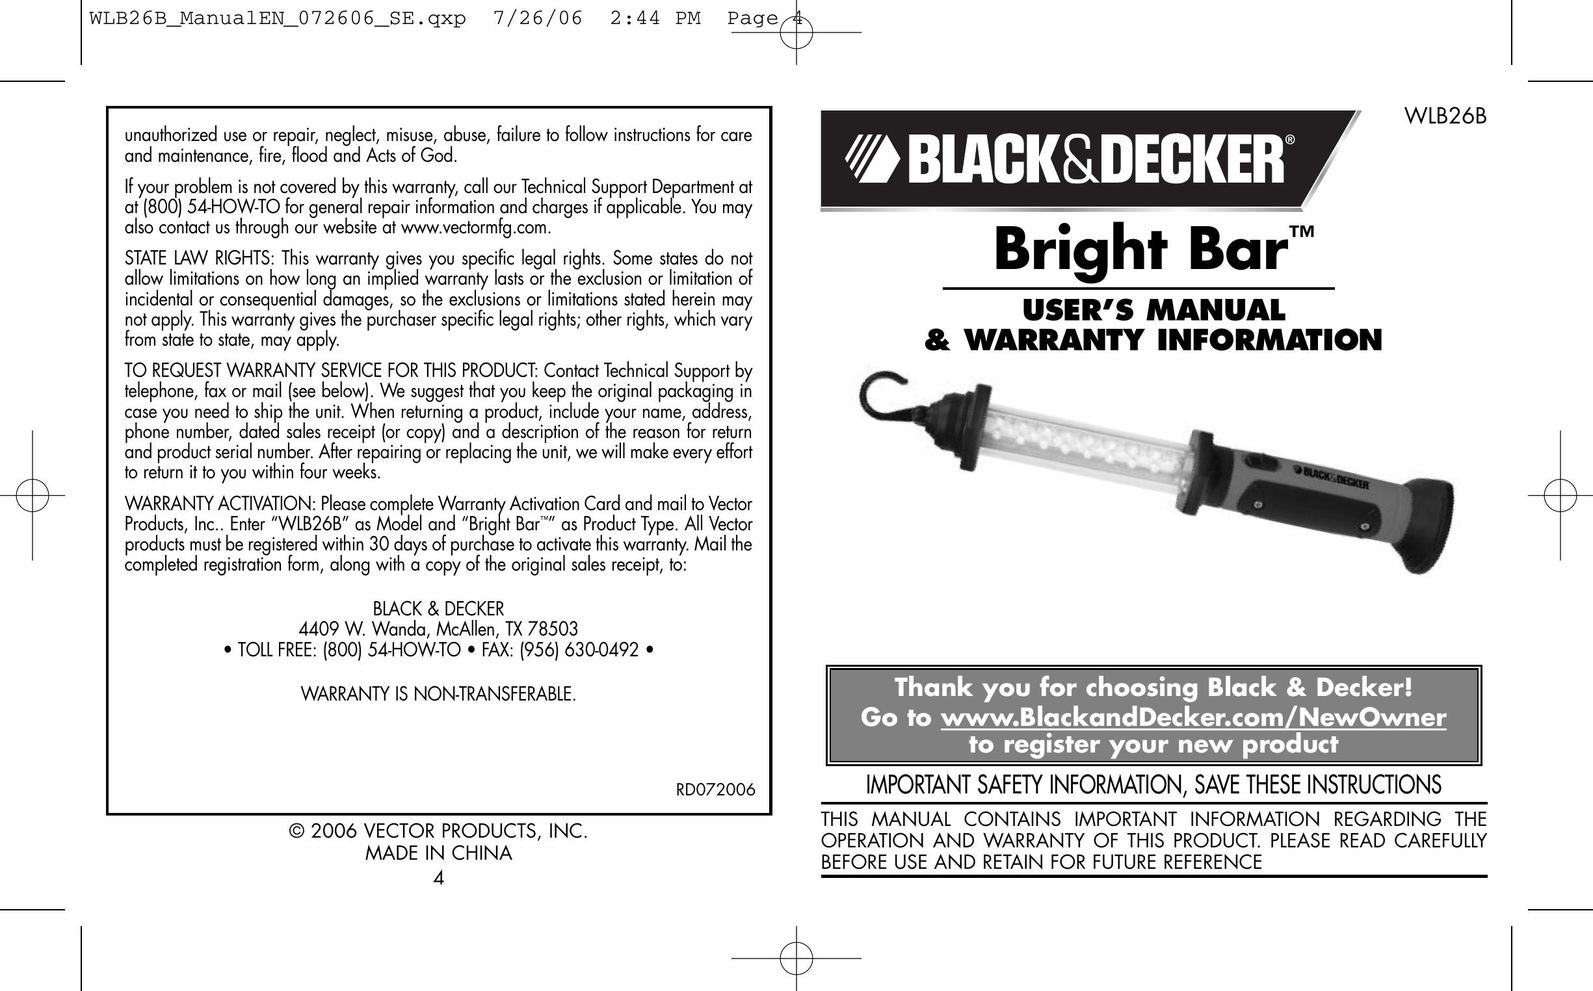 Black & Decker WLB26B Home Safety Product User Manual